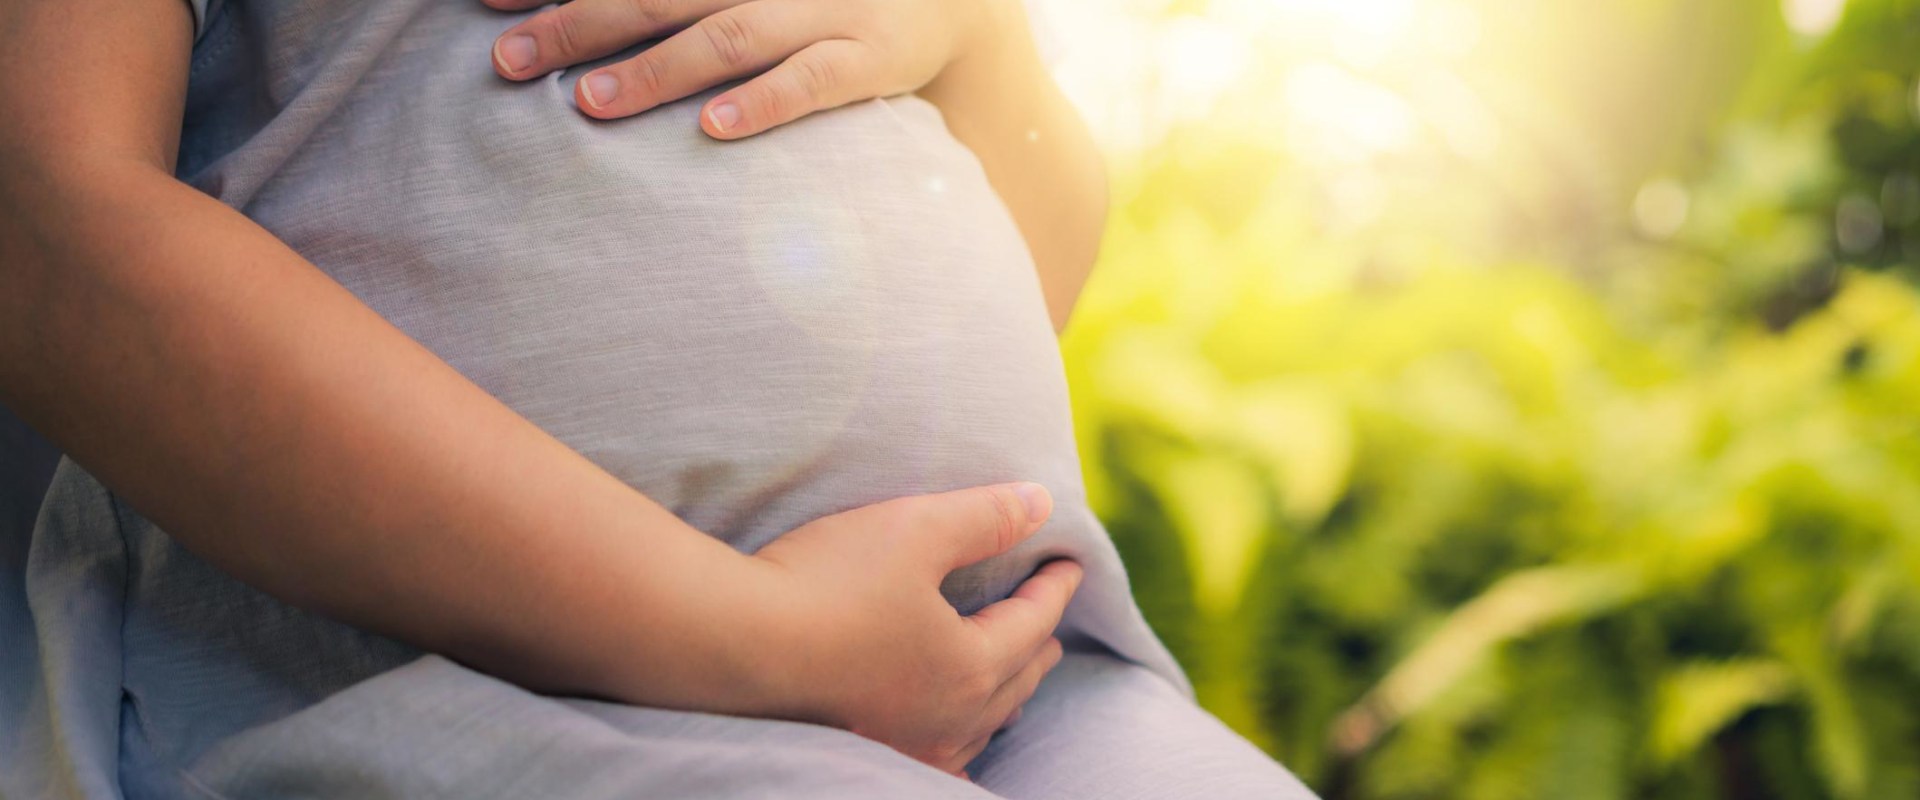 Should i take extra vitamin d while pregnant?